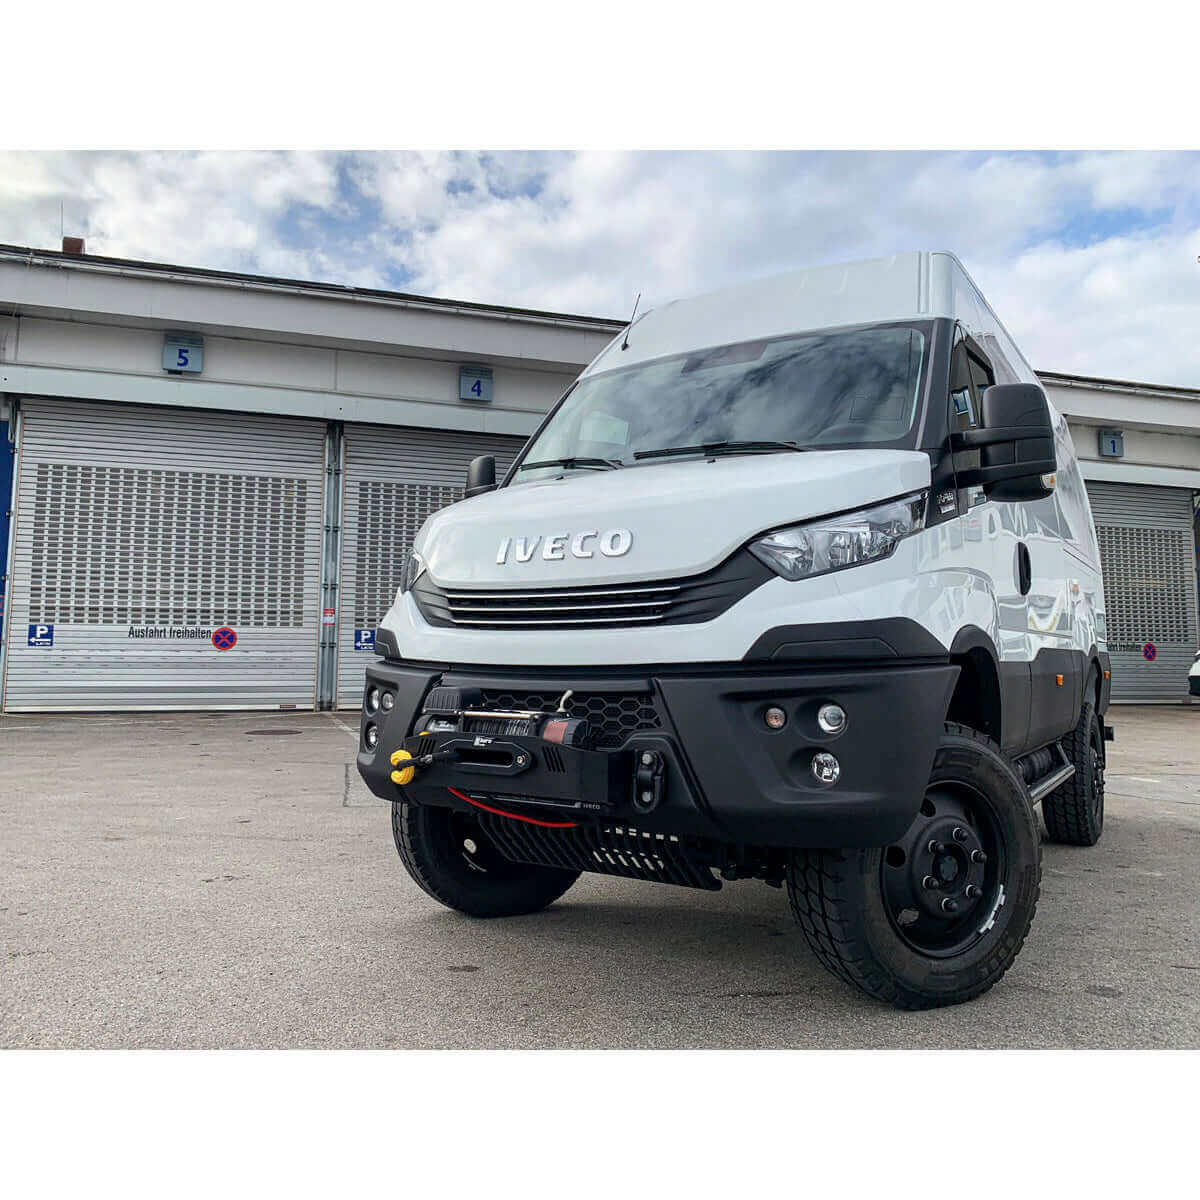 Seilwinden Set Iveco Daily 4x4 ab 2019, inkl. Zeon 12 > :: Taubenreuther  GmbH